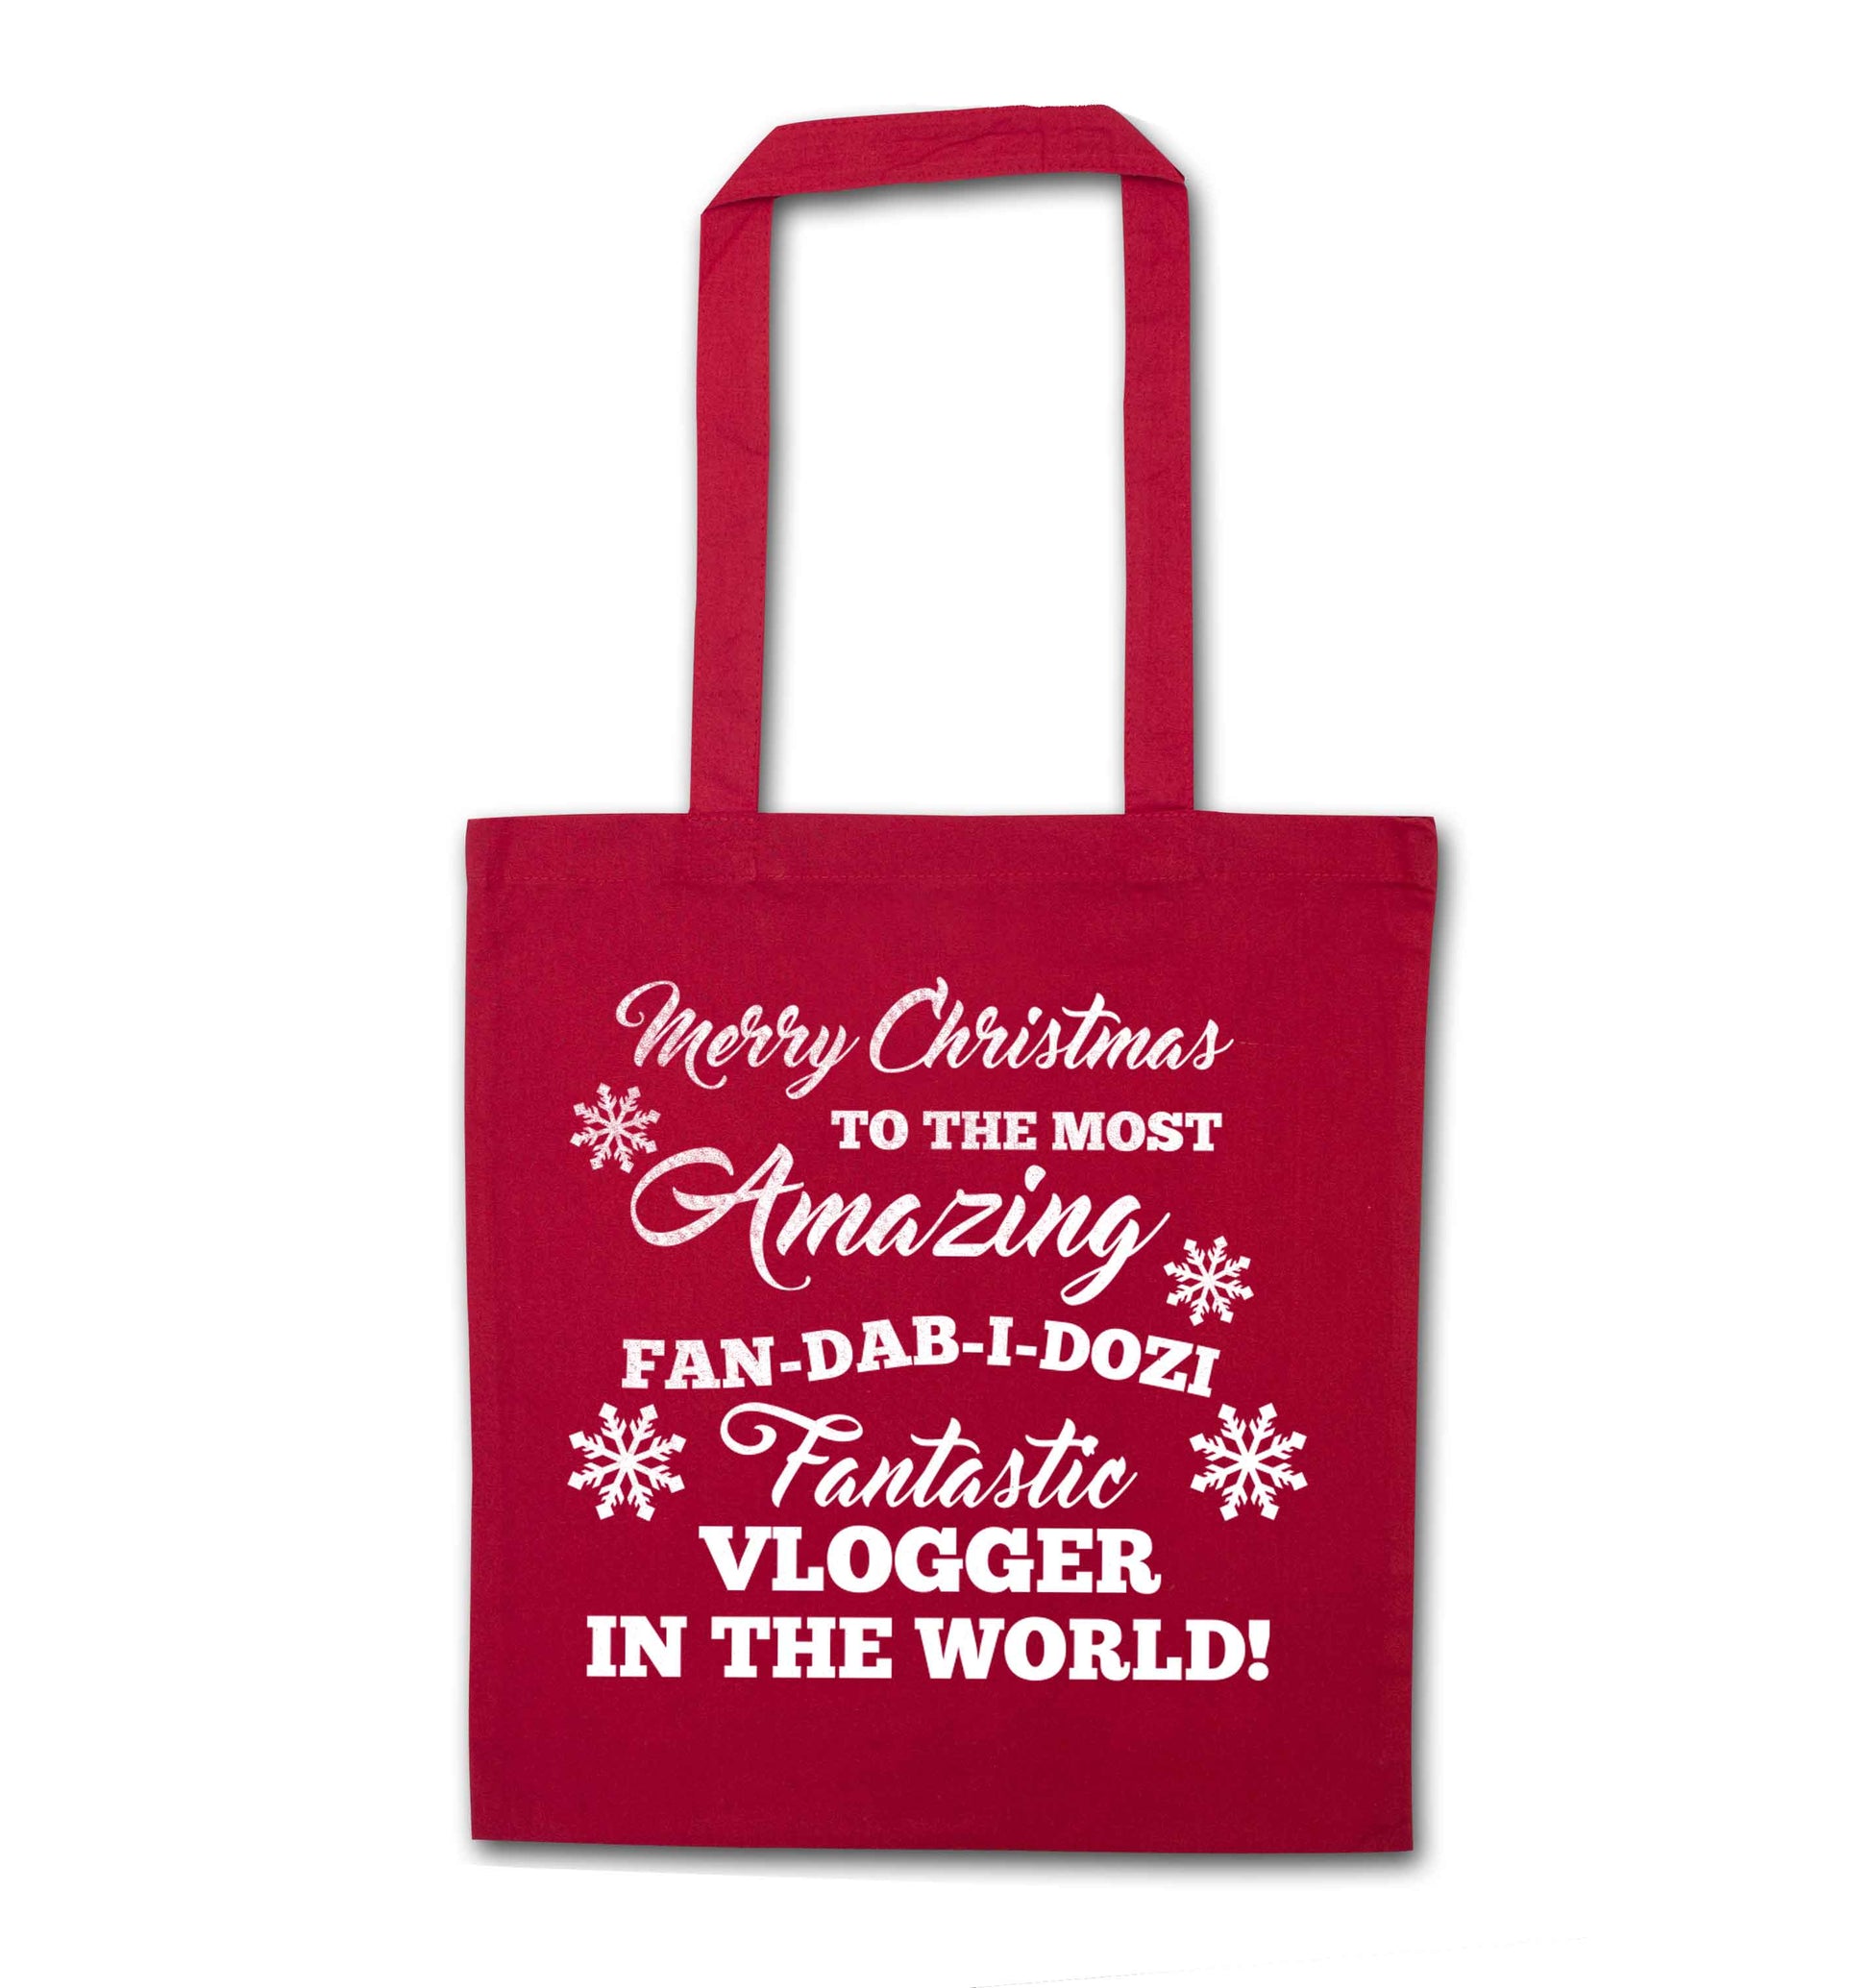 Merry Christmas to the most amazing fan-dab-i-dozi fantasic vlogger in the world red tote bag